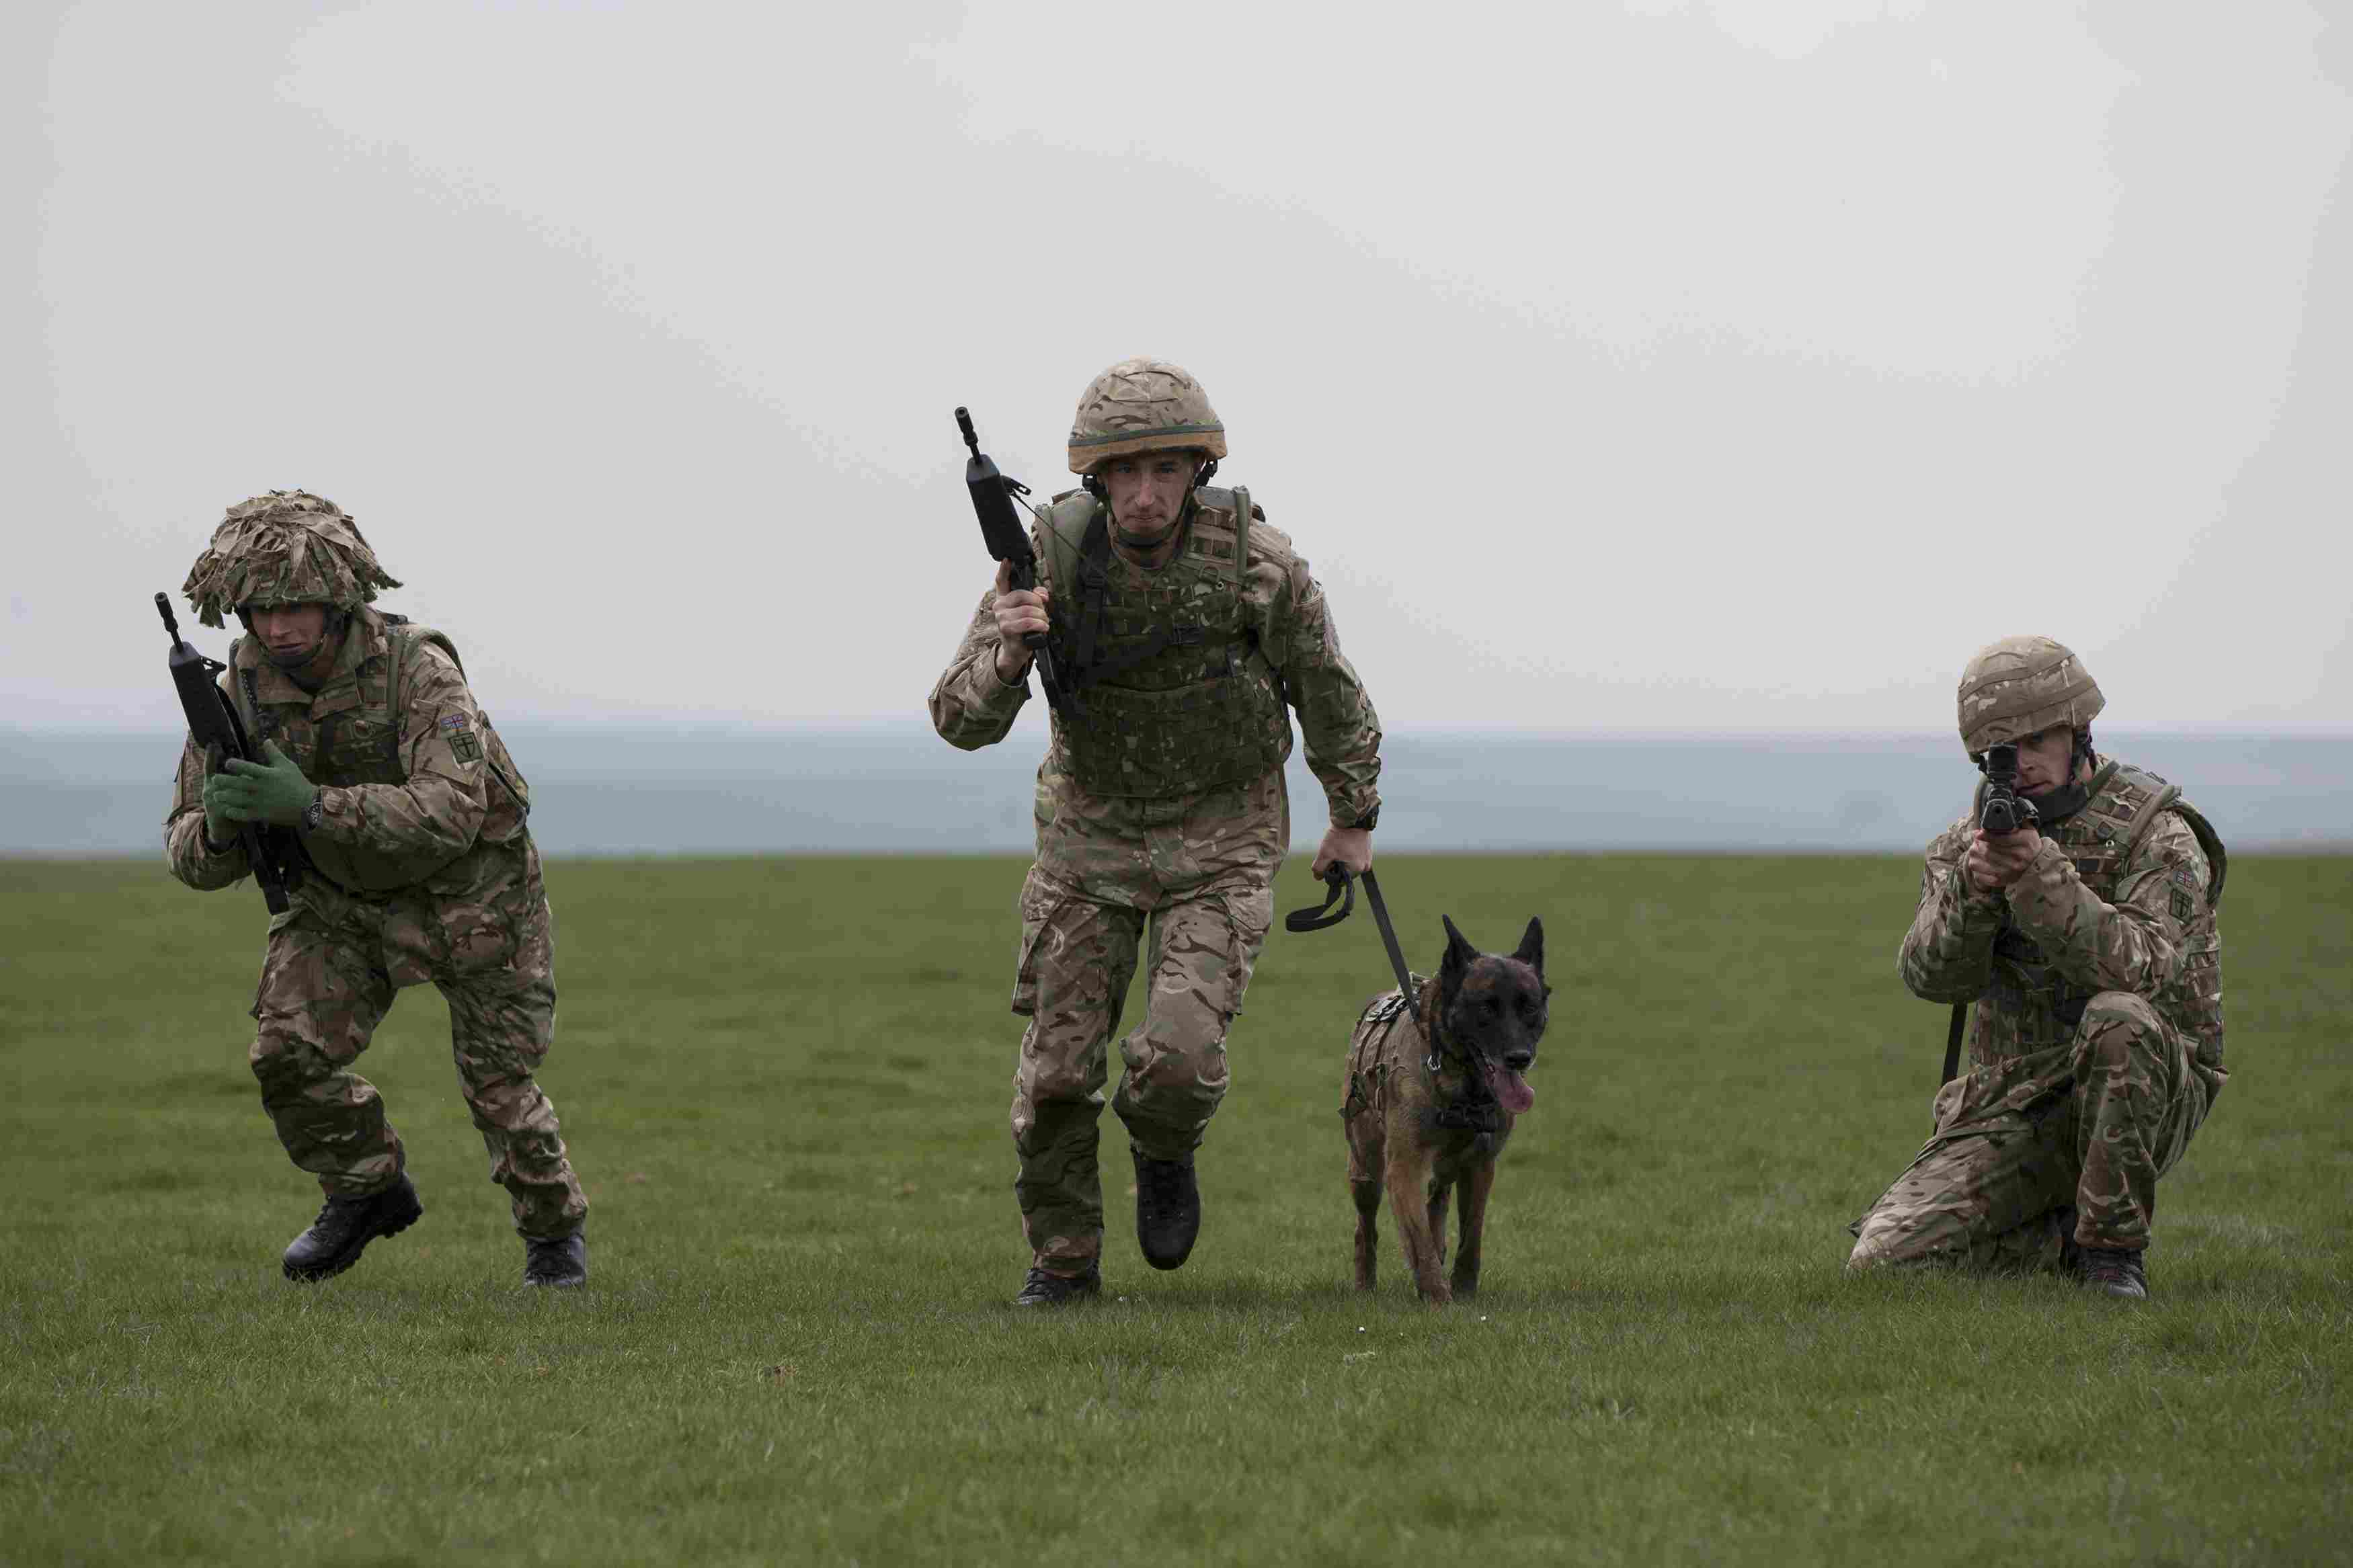 Soldiers with military dog